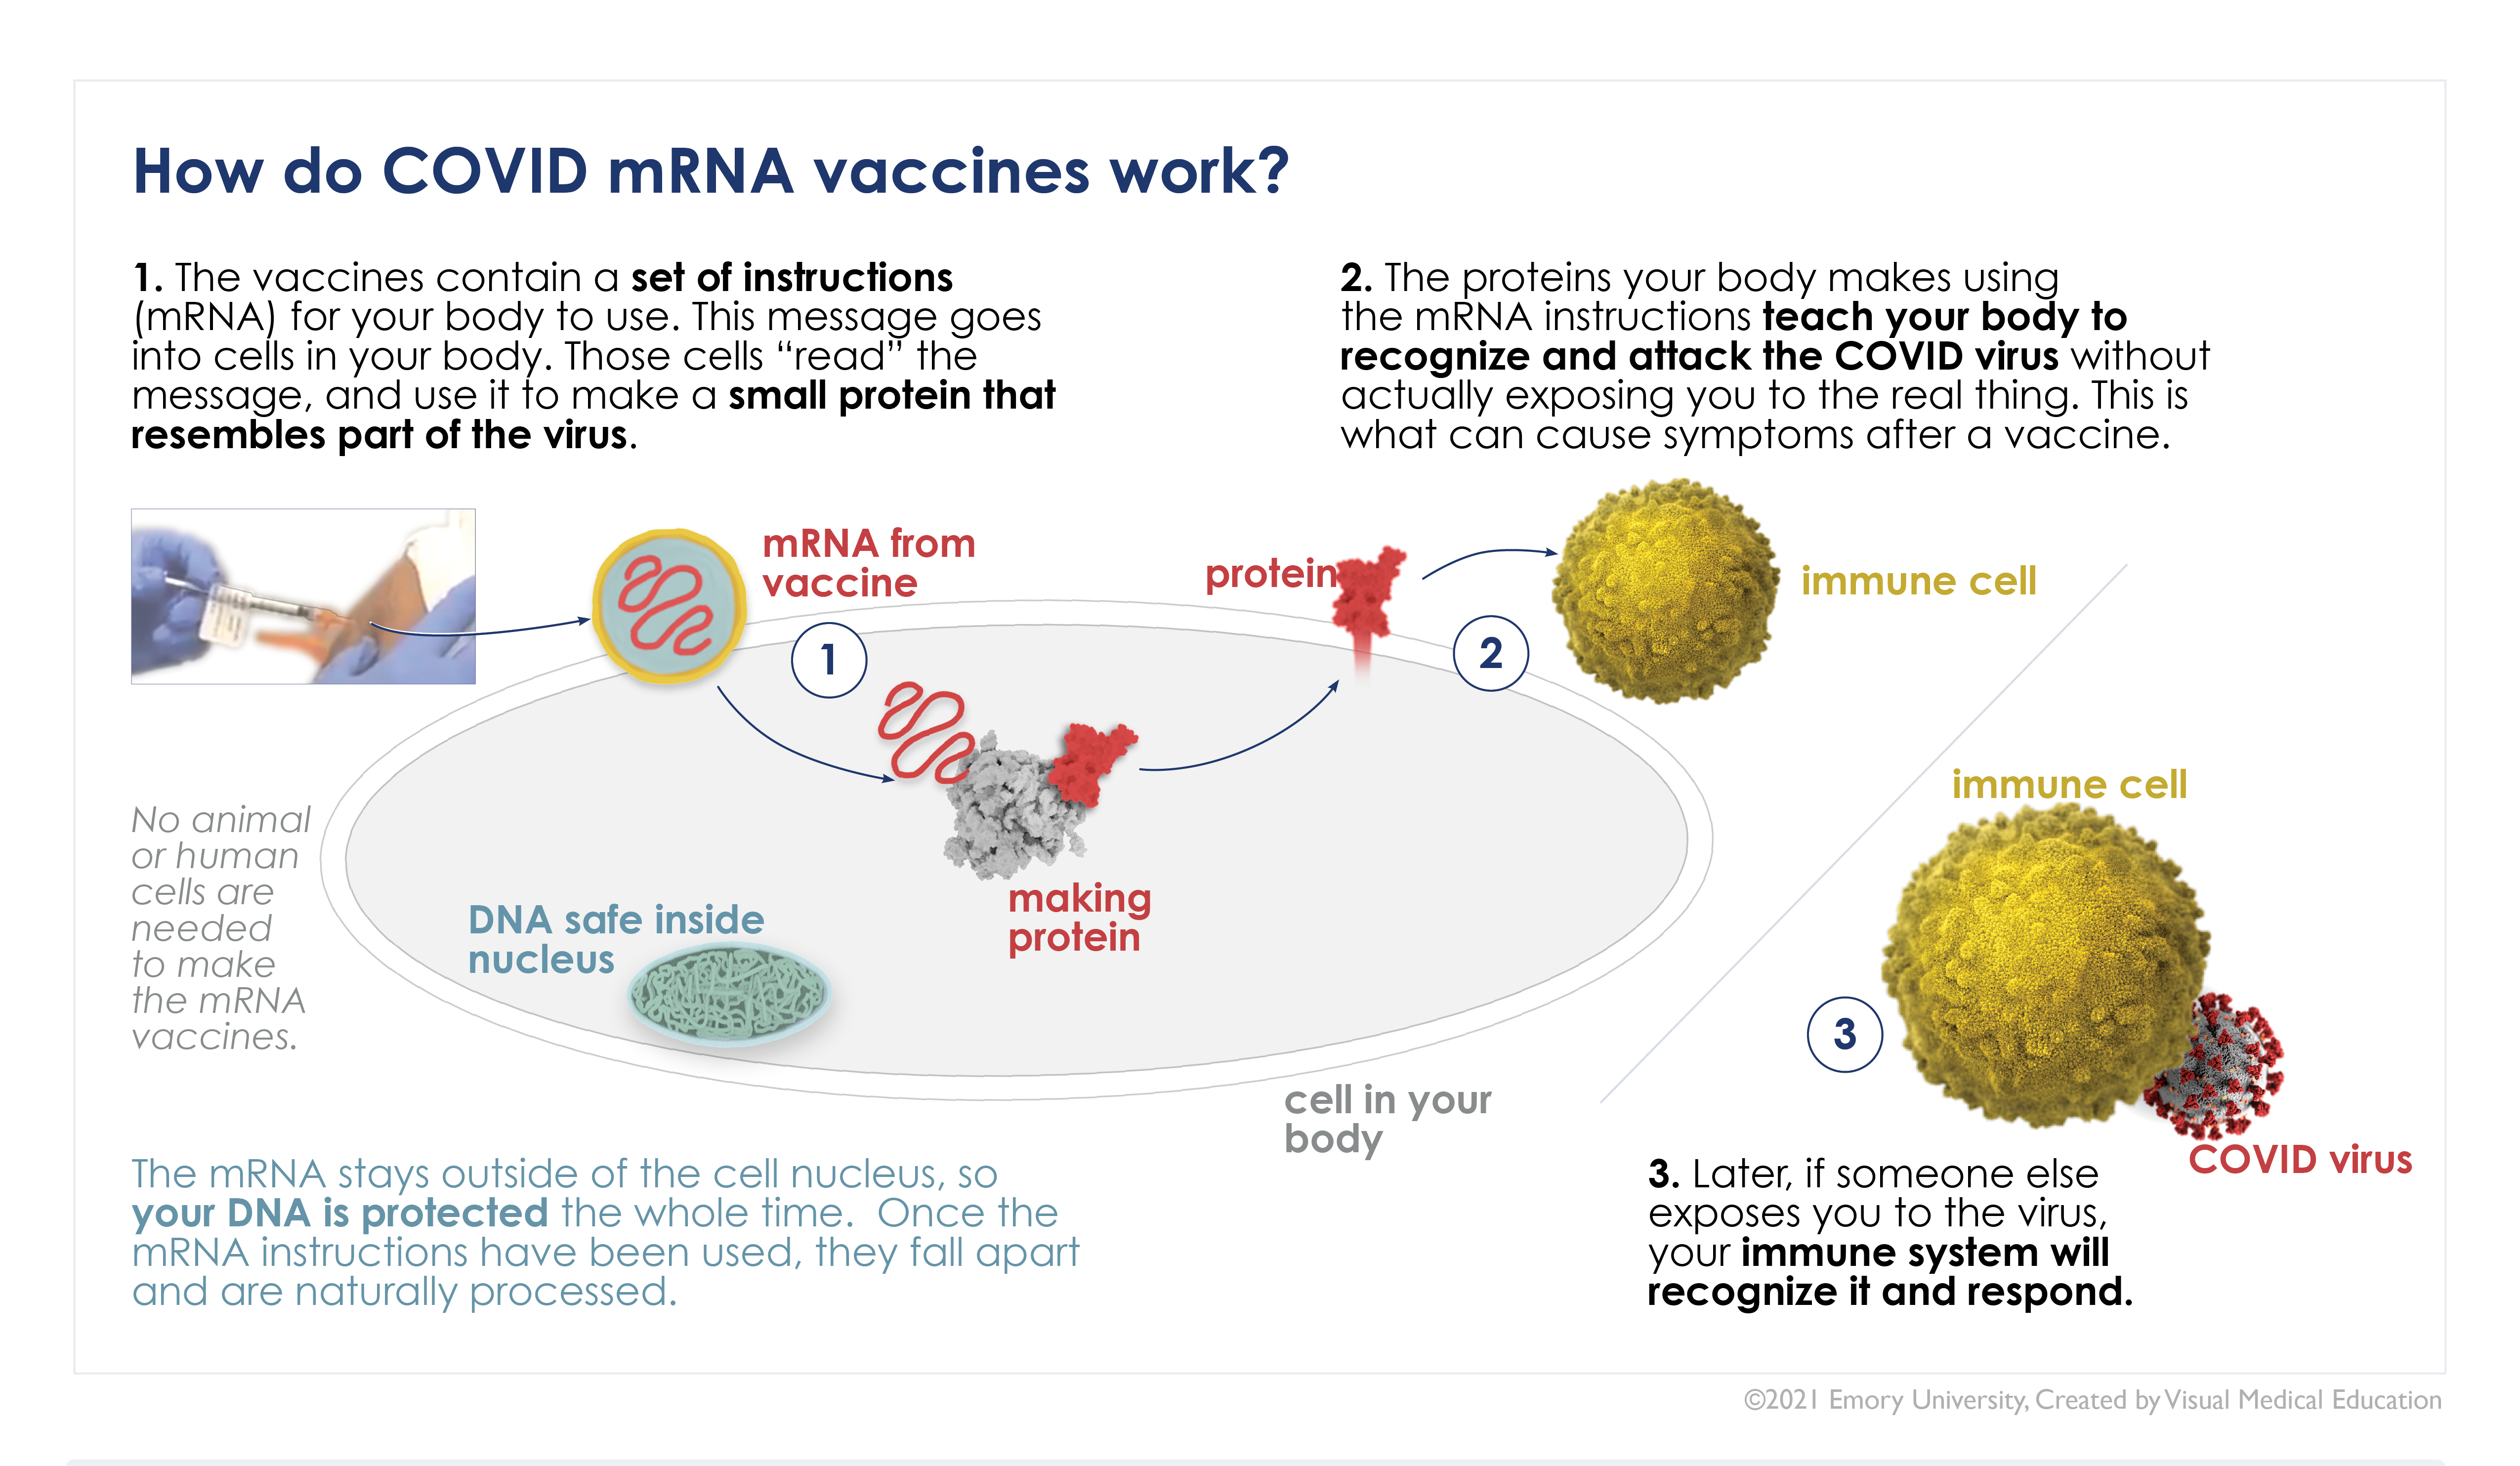 How Do COVID mRNA Vaccines Work? This illustration depicts the molecular function of the mRNA vaccines.